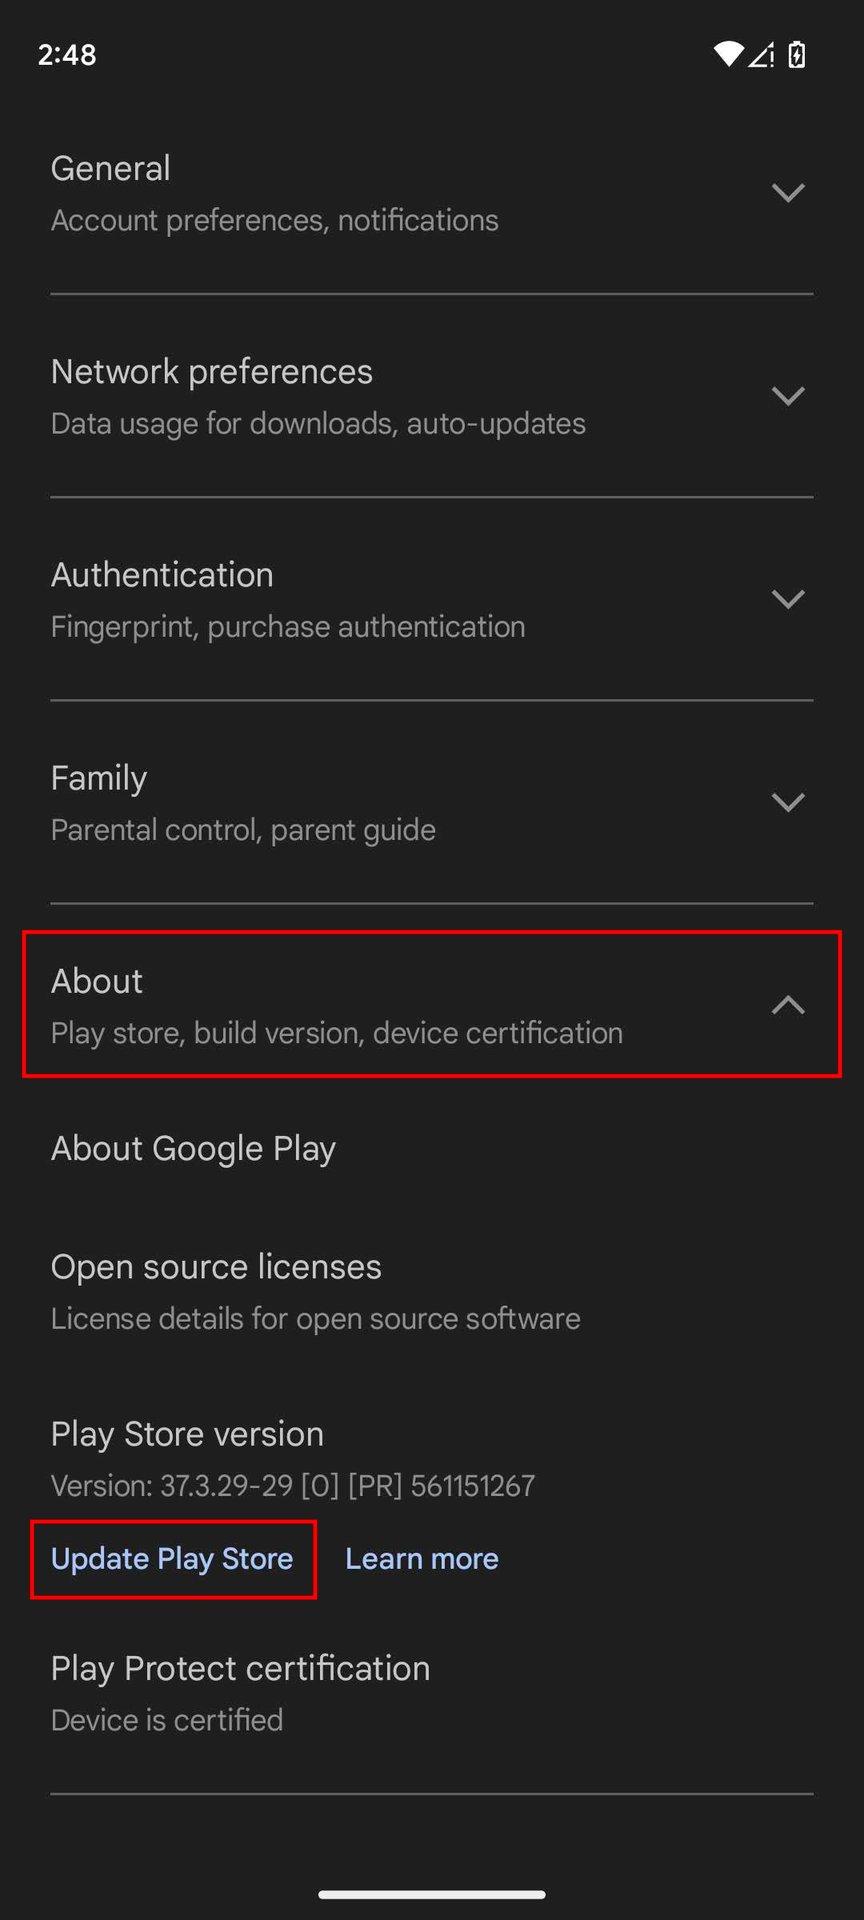 How to install and download Google Play store - it's easy!